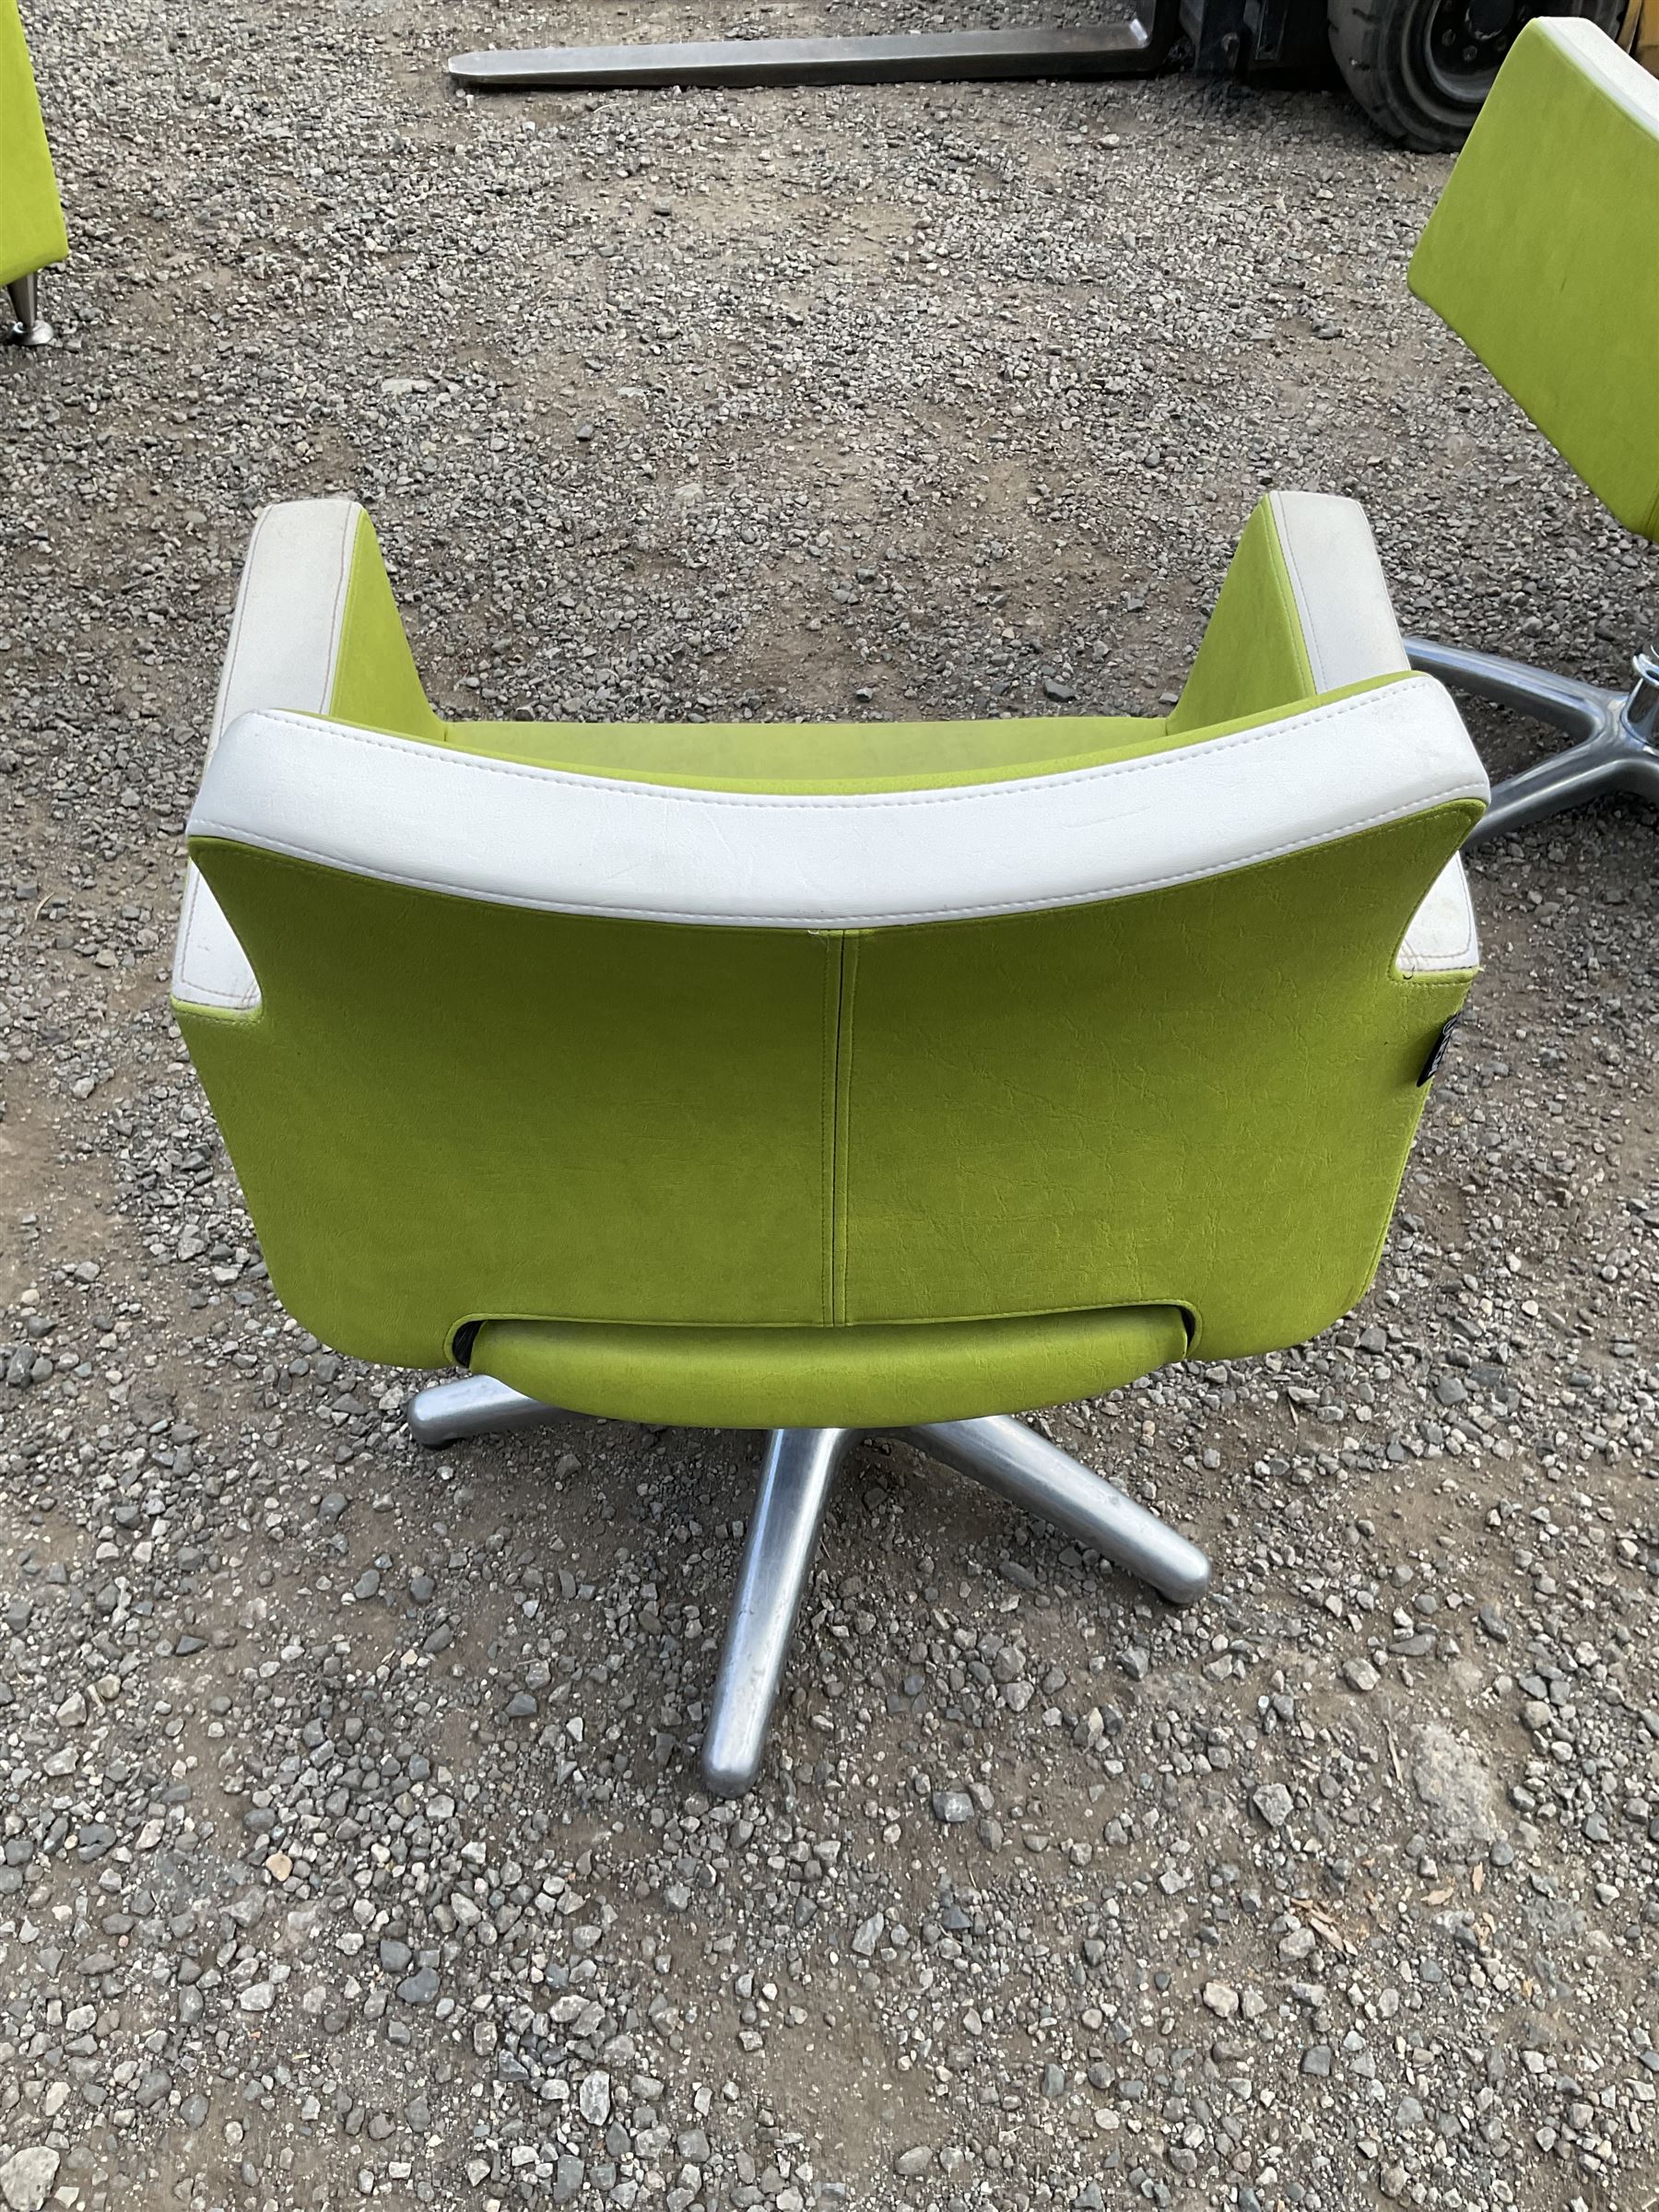 Salon Equipment - Set of four green and white faux leather hydraulic styling salon chairs - THIS LOT - Image 4 of 5